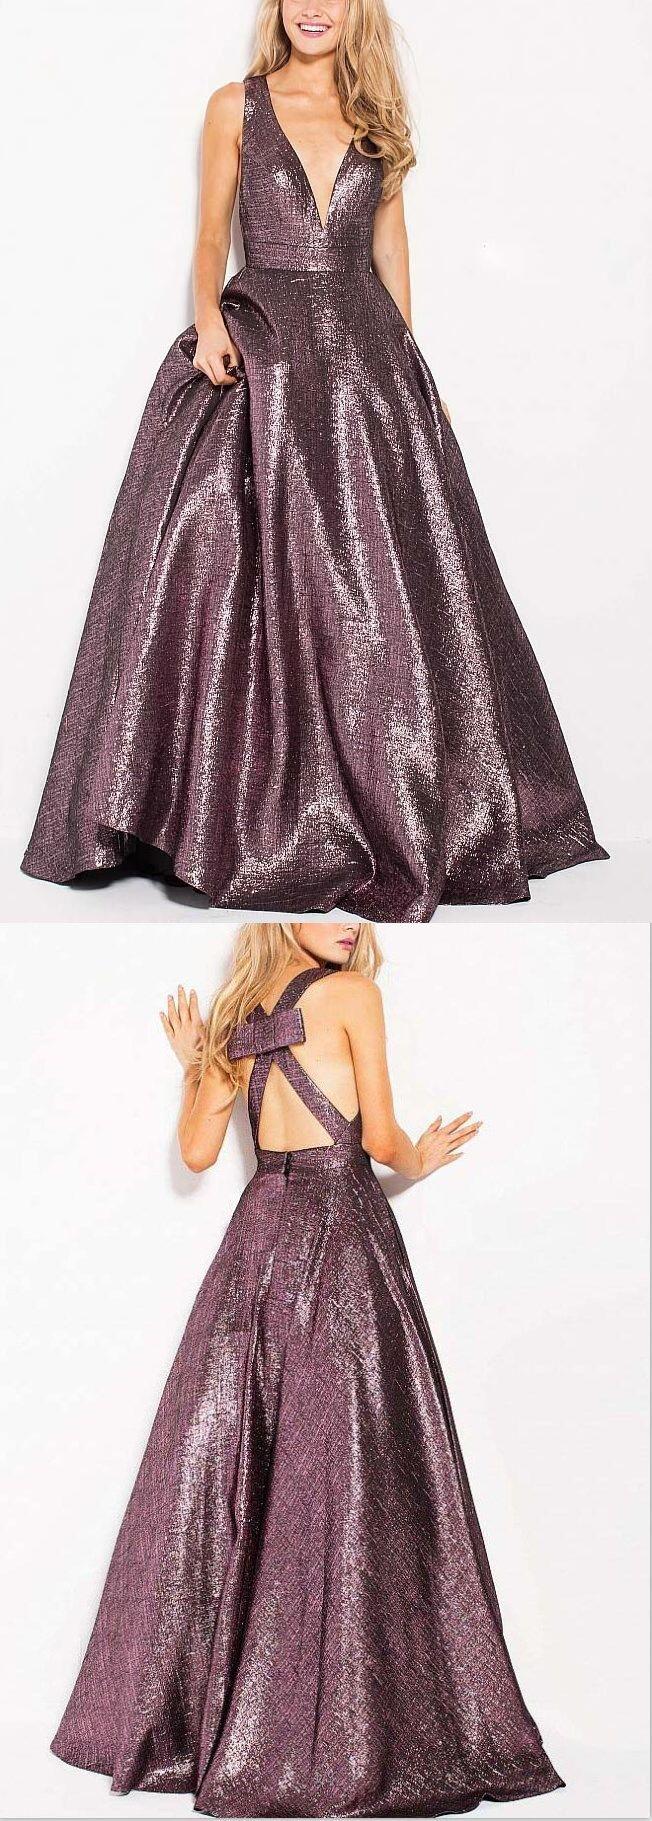 Mariage - Deep V Neck Sexy Long Sparkly Unique Design Prom Dresses, Evening Dress, Fashion Gown, PD0480